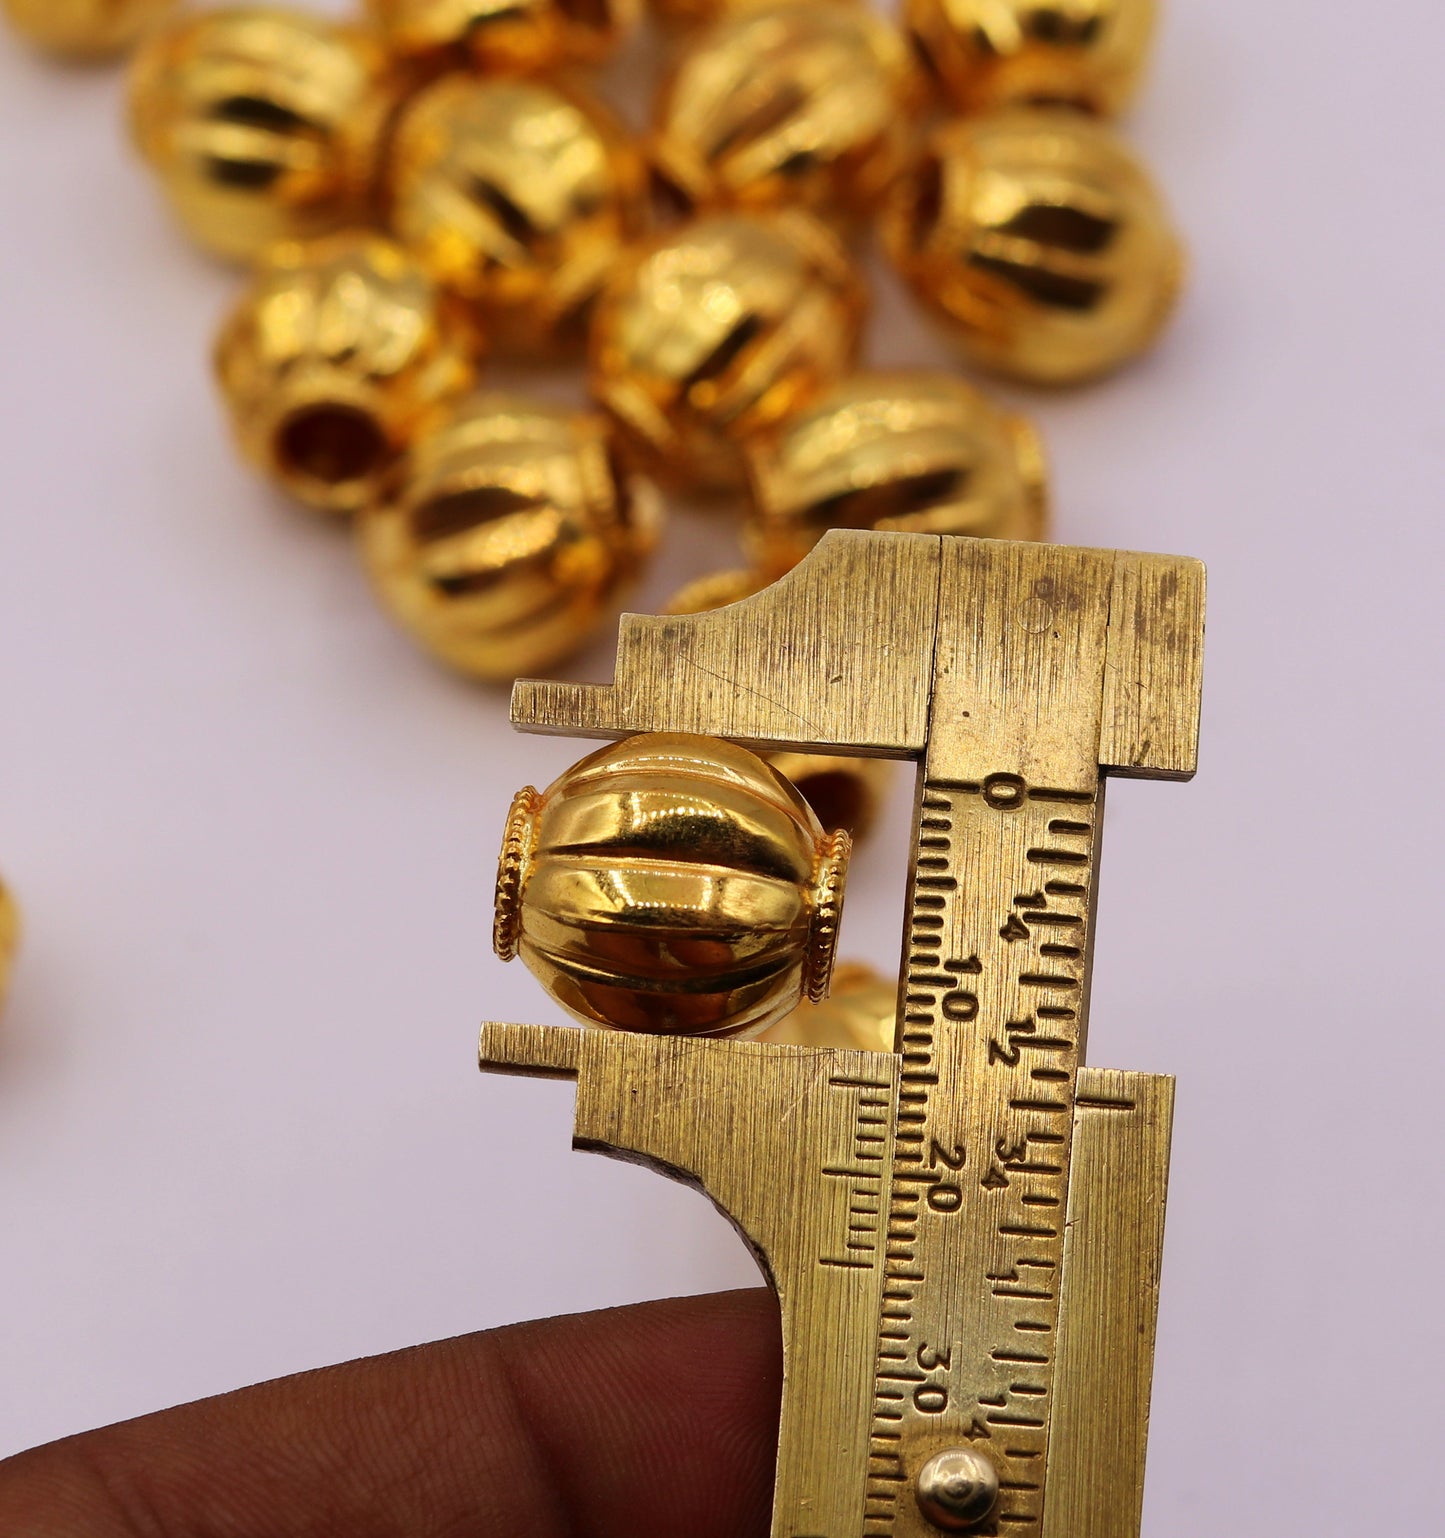 22kt yellow gold handmade antique design traditional jewelry making loose beads tribal jewelry bead07 - TRIBAL ORNAMENTS